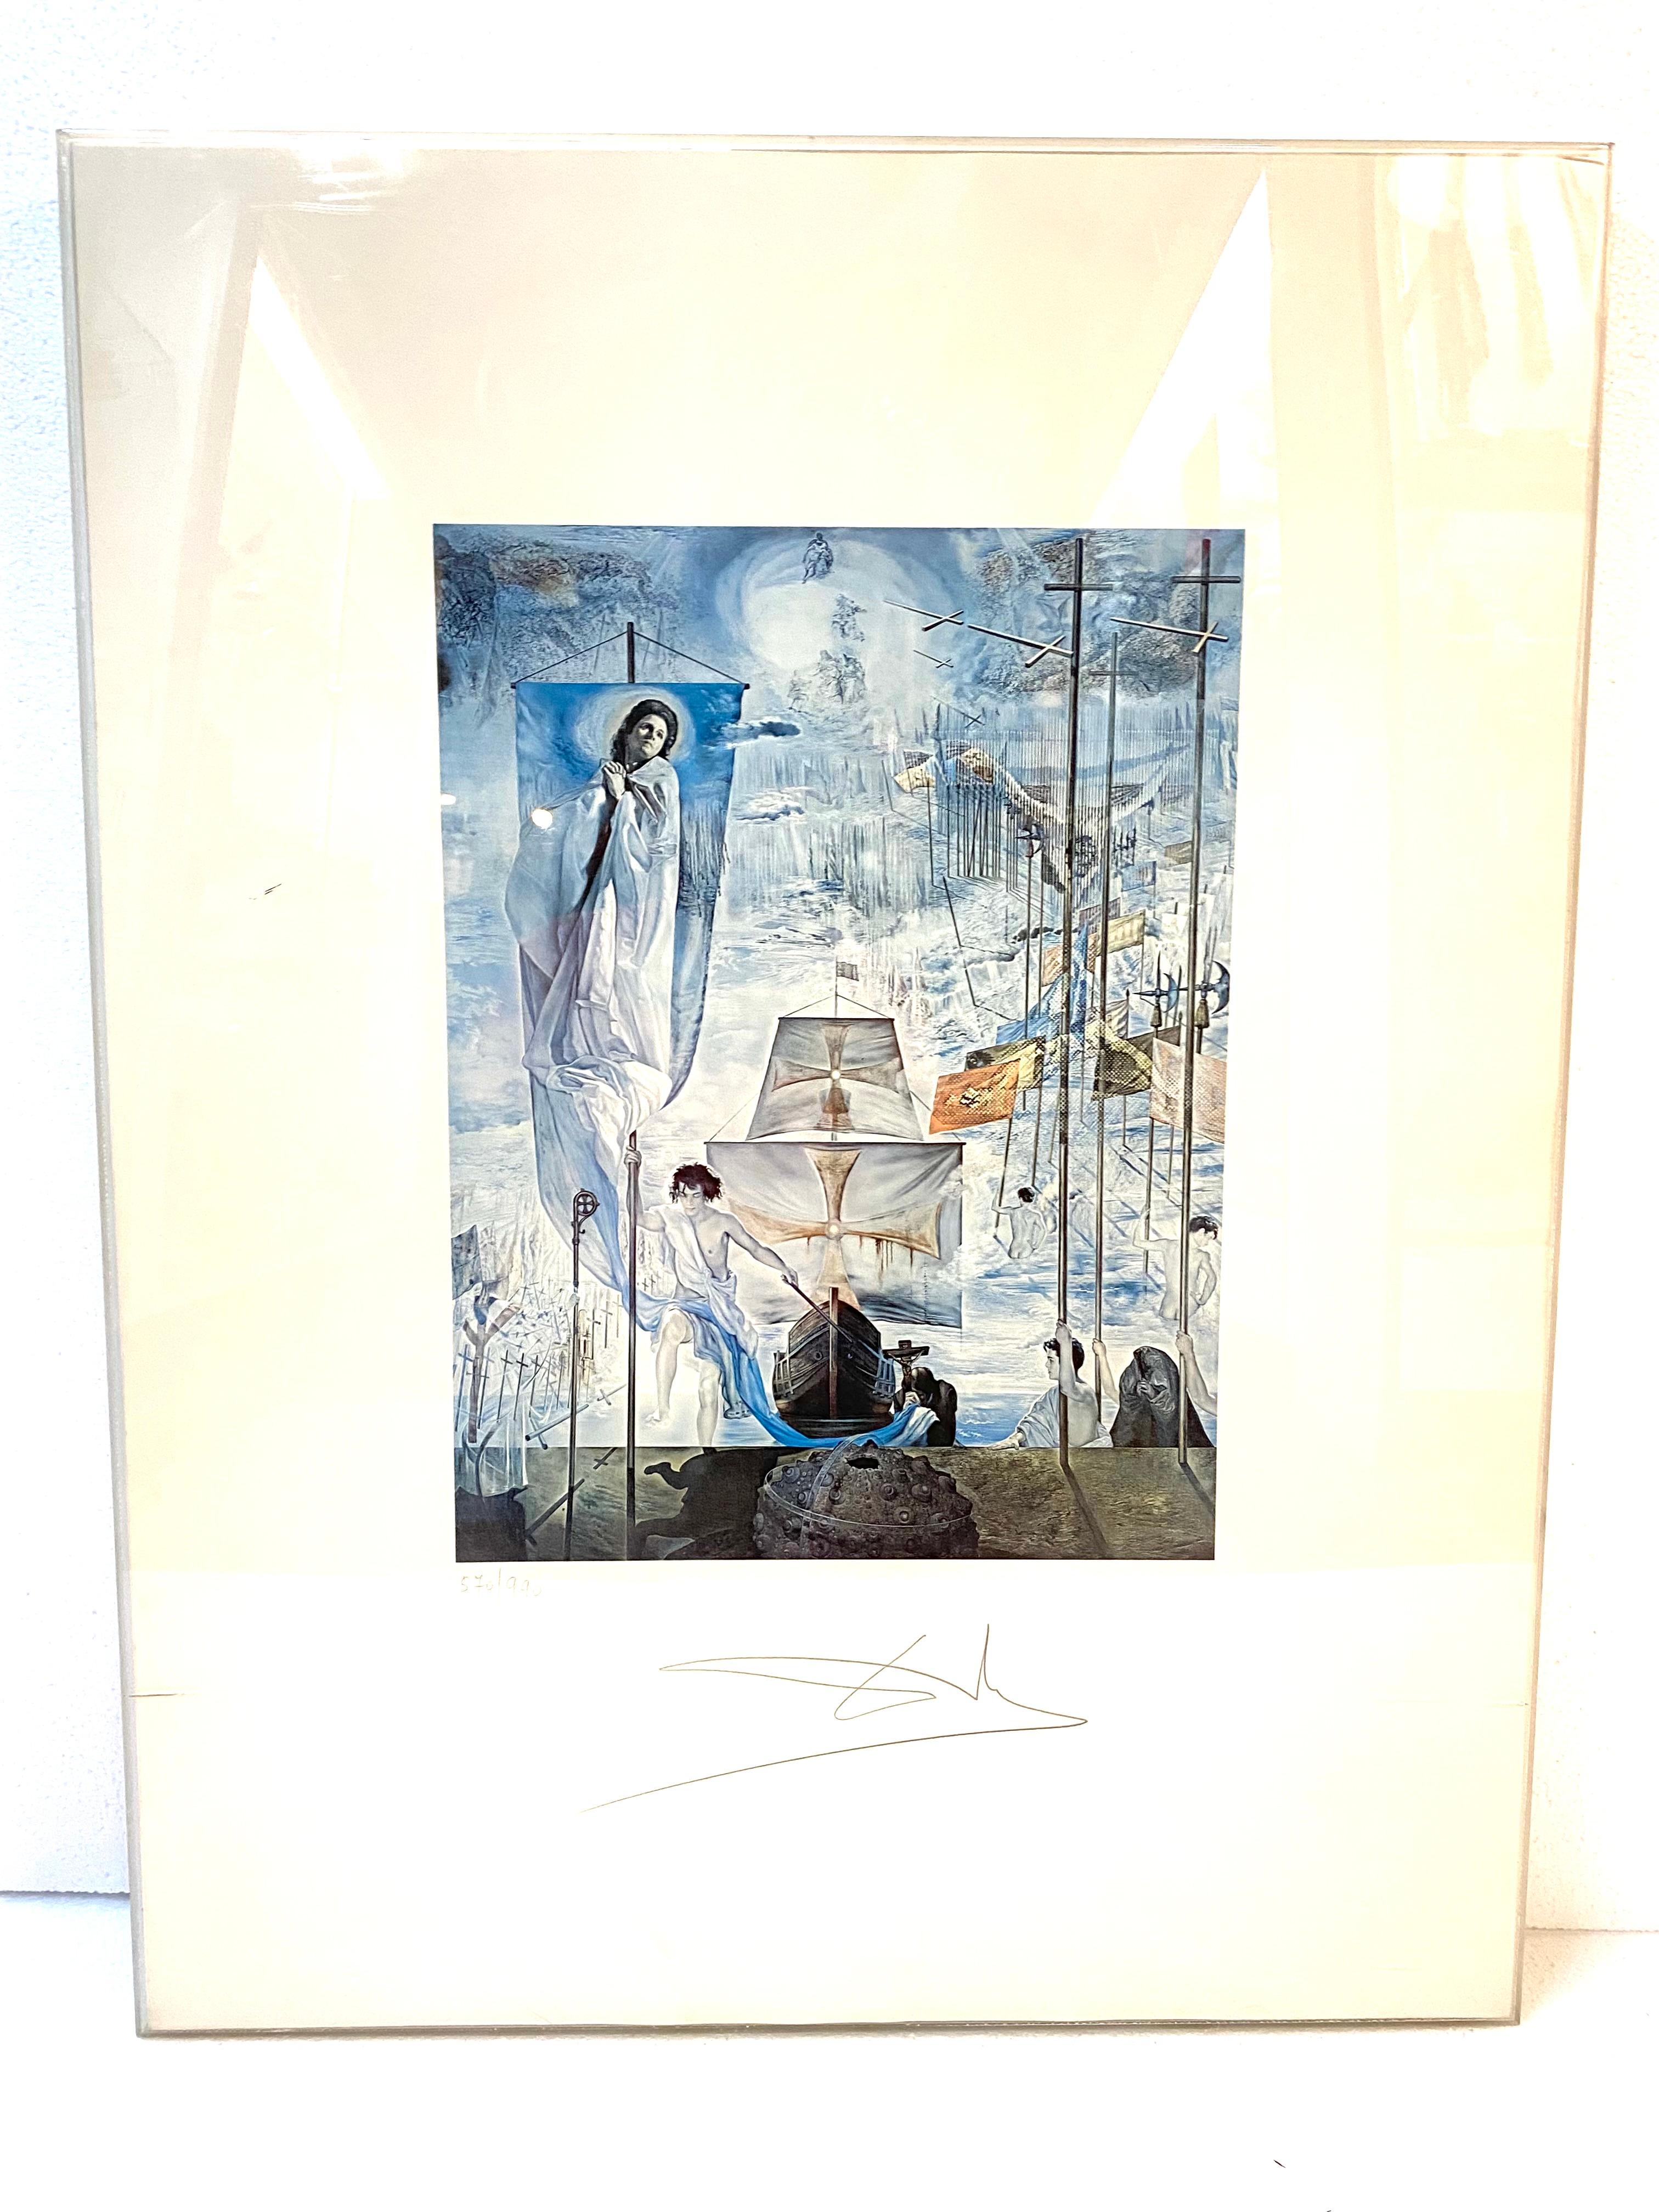 This is an original hand signed limited edition 570 / 990 Dali lithograph.
It was created from the original oil on canvas painting (14x9 feet) that Salvador Dali completes in 1959.As a devout Roman Catholic, Dali portrayed Columbus as a Christian